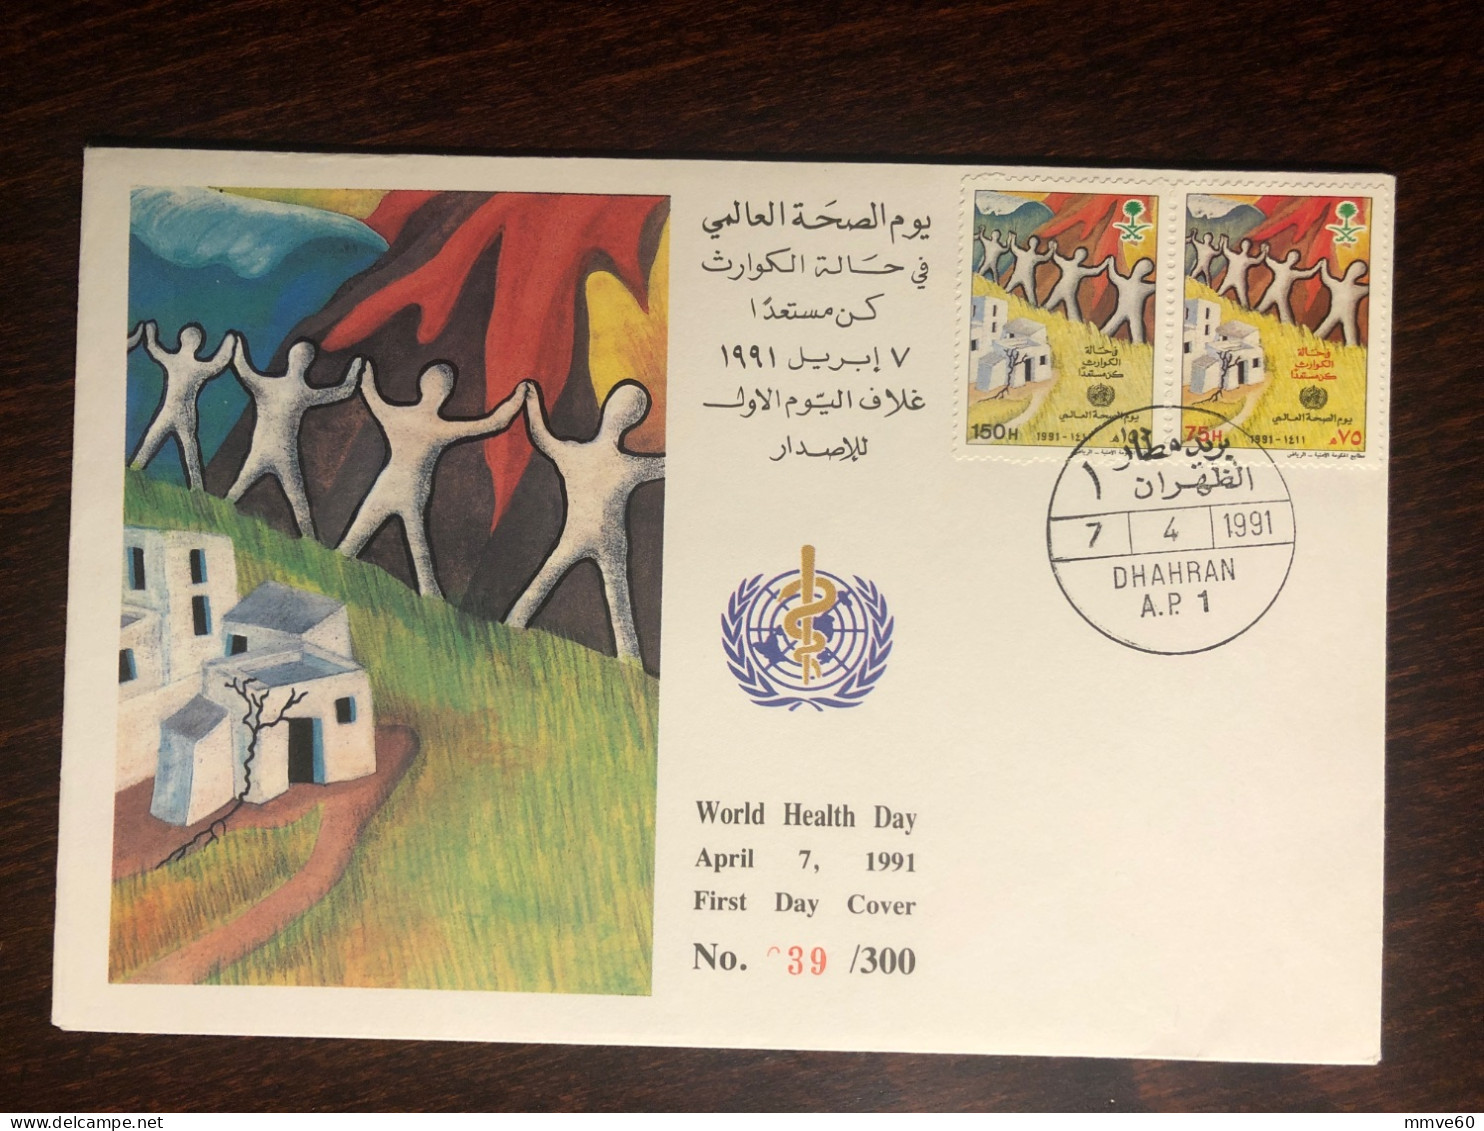 SAUDI ARABIA FDC COVER ONLY 300 ISSUED 1991 YEAR WHO HEALTH MEDICINE STAMPS - Arabie Saoudite